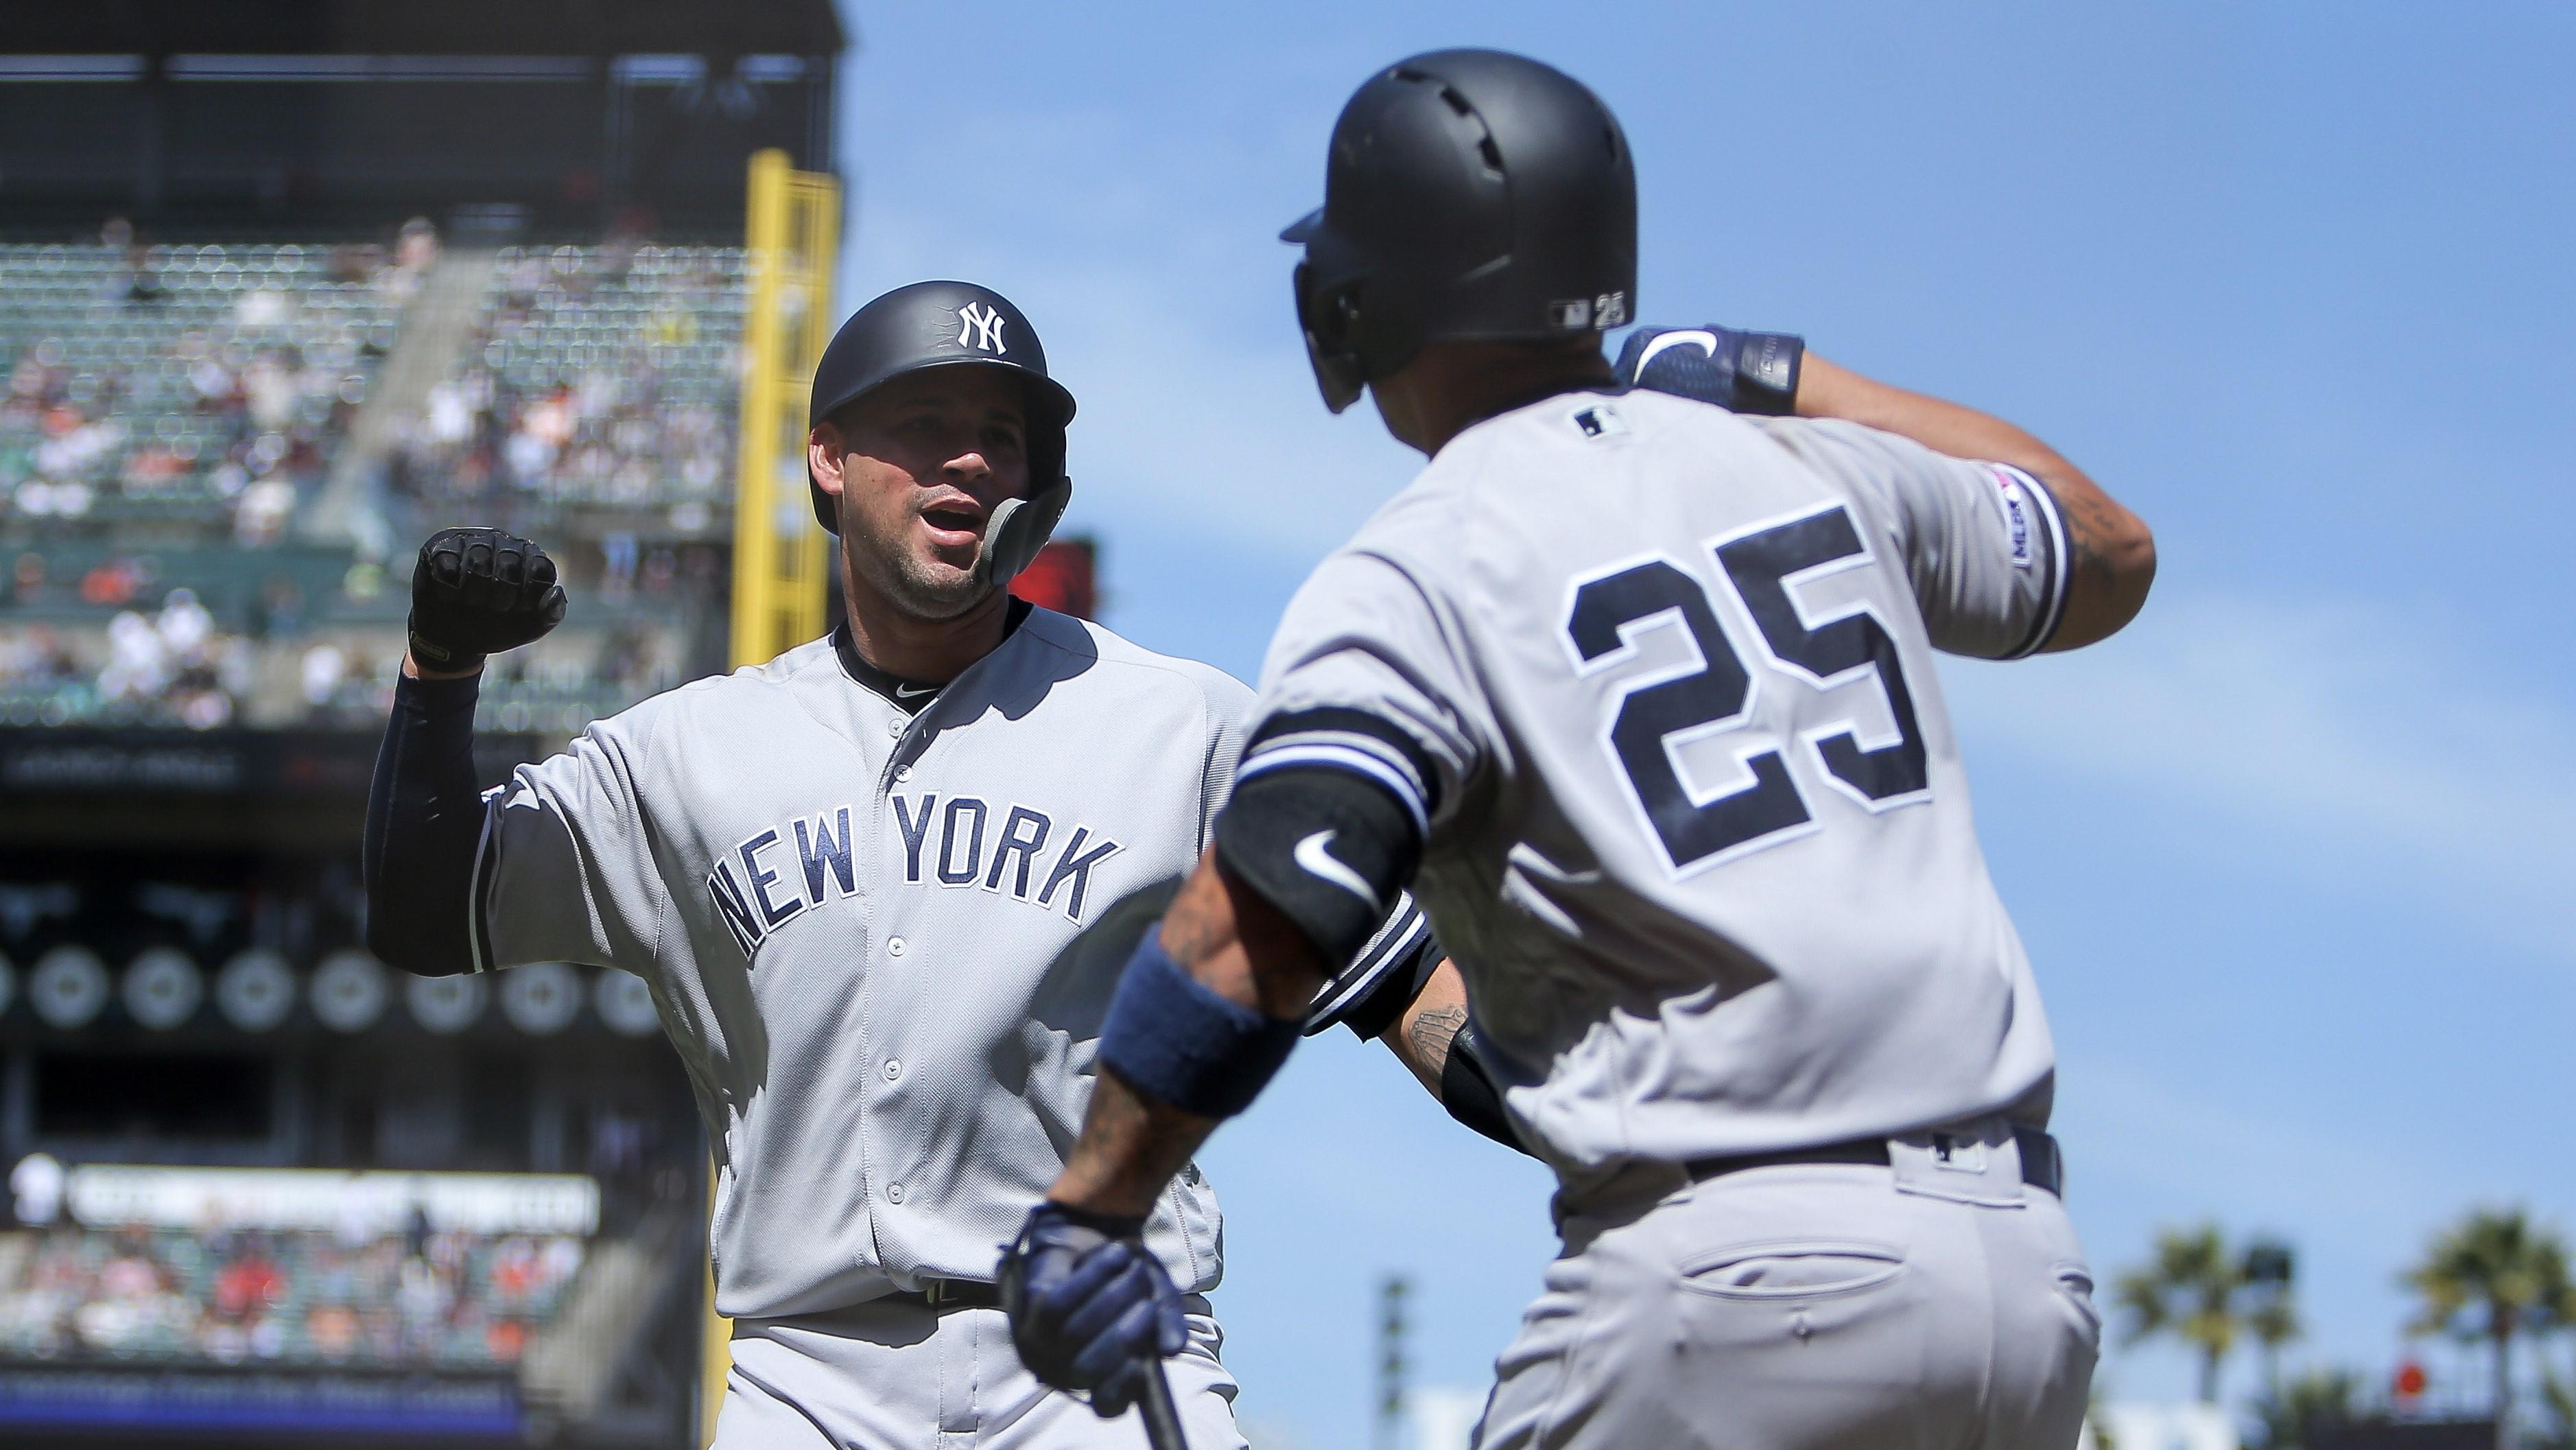 Apr 28, 2019; San Francisco, CA, USA; New York Yankees catcher Gary Sanchez (24) celebrates with second baseman Gleyber Torres (25) after hitting a two run home run during the sixth inning against the San Francisco Giants at Oracle Park. Mandatory Credit: Sergio Estrada-USA TODAY Sports / Sergio Estrada-USA TODAY Sports